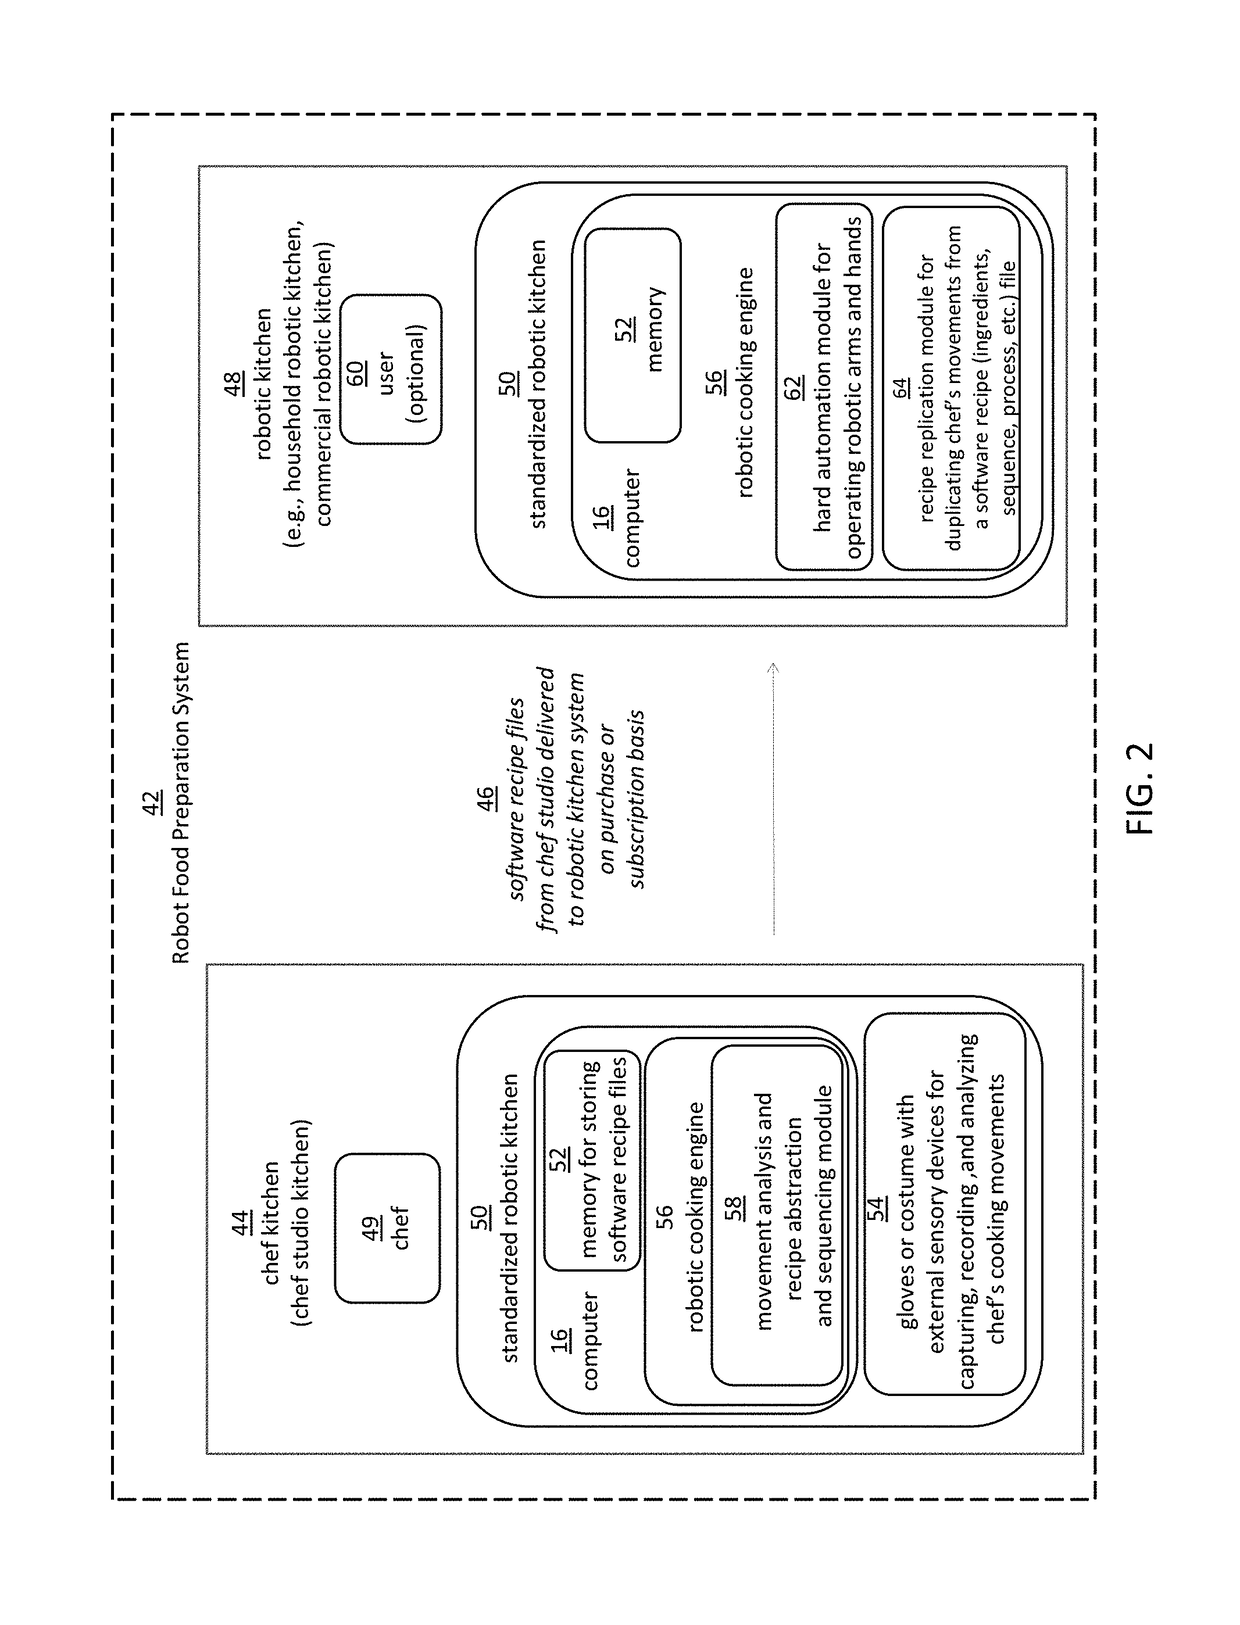 Robotic manipulation methods and systems for executing a domain-specific application in an instrumented environment with containers and electronic minimanipulation libraries